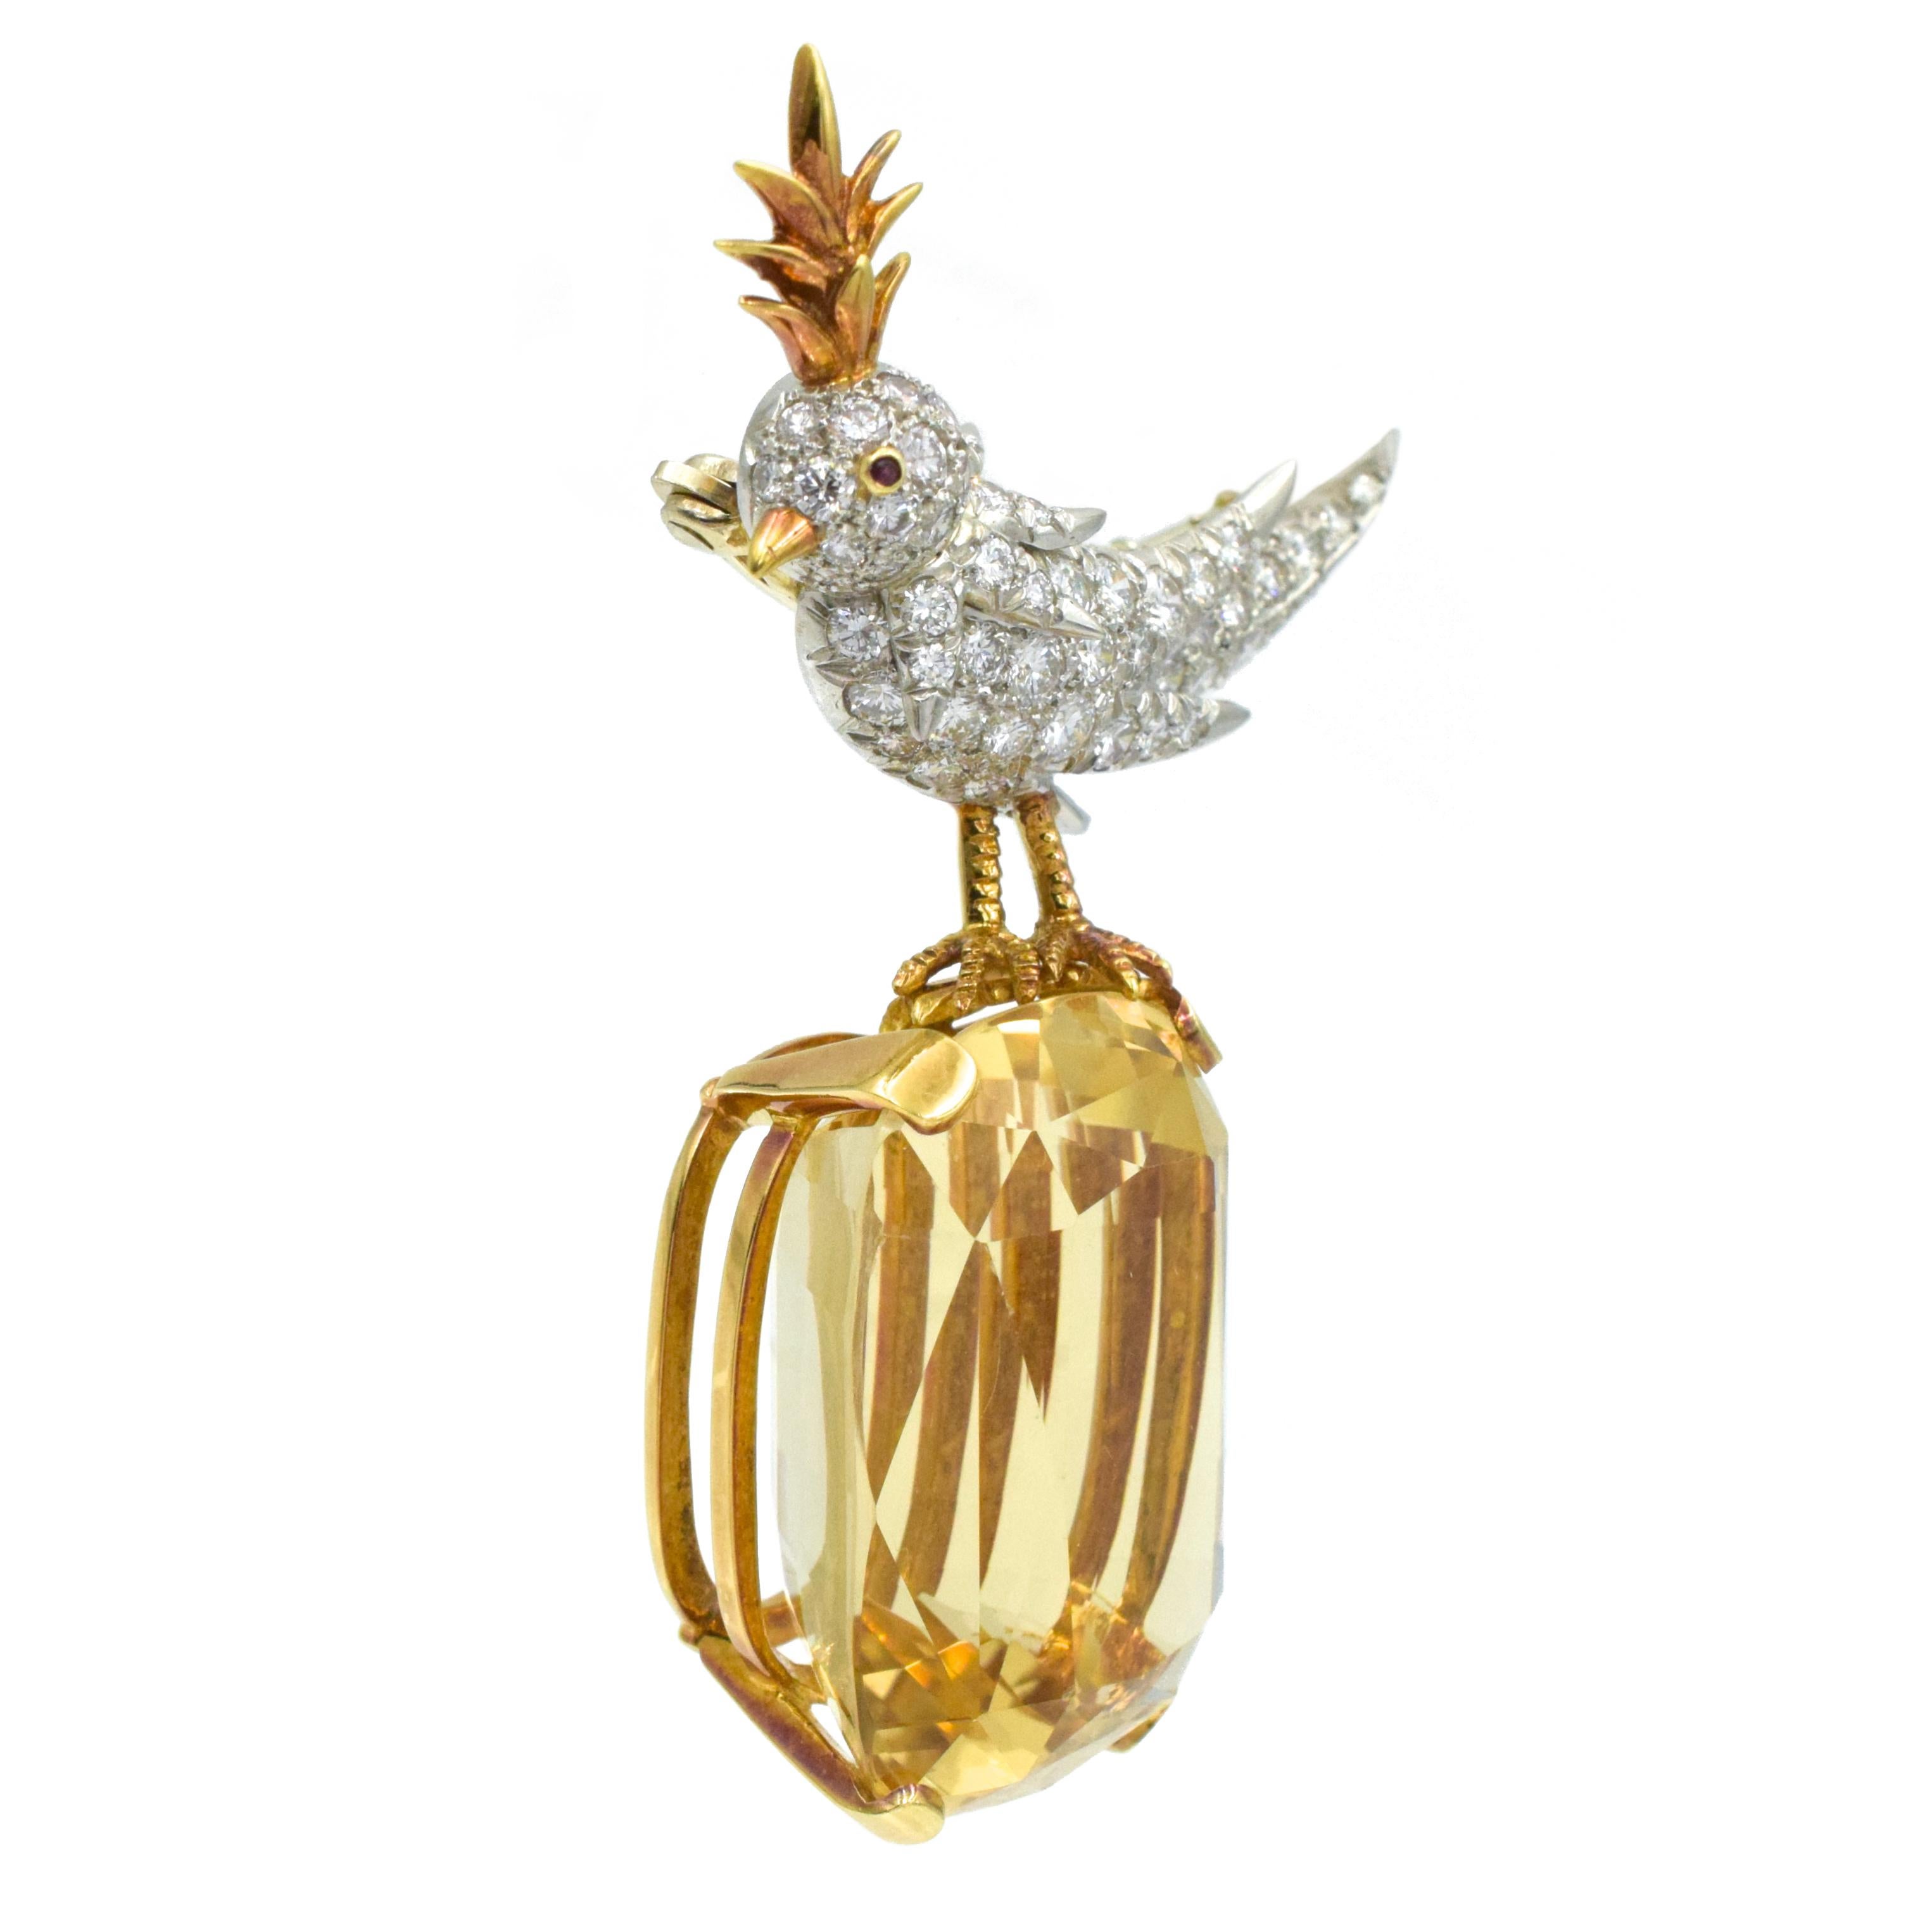 Tiffany Schlumberger   Bird on a Rock Pin   18k White And Yellow Gold. The bird is set
with 73 round brilliant cut diamonds with an approximate weight of 3.0carats, 
 1 round ruby with an approximate weight of 0.02ct. The bird is placed sitting
on